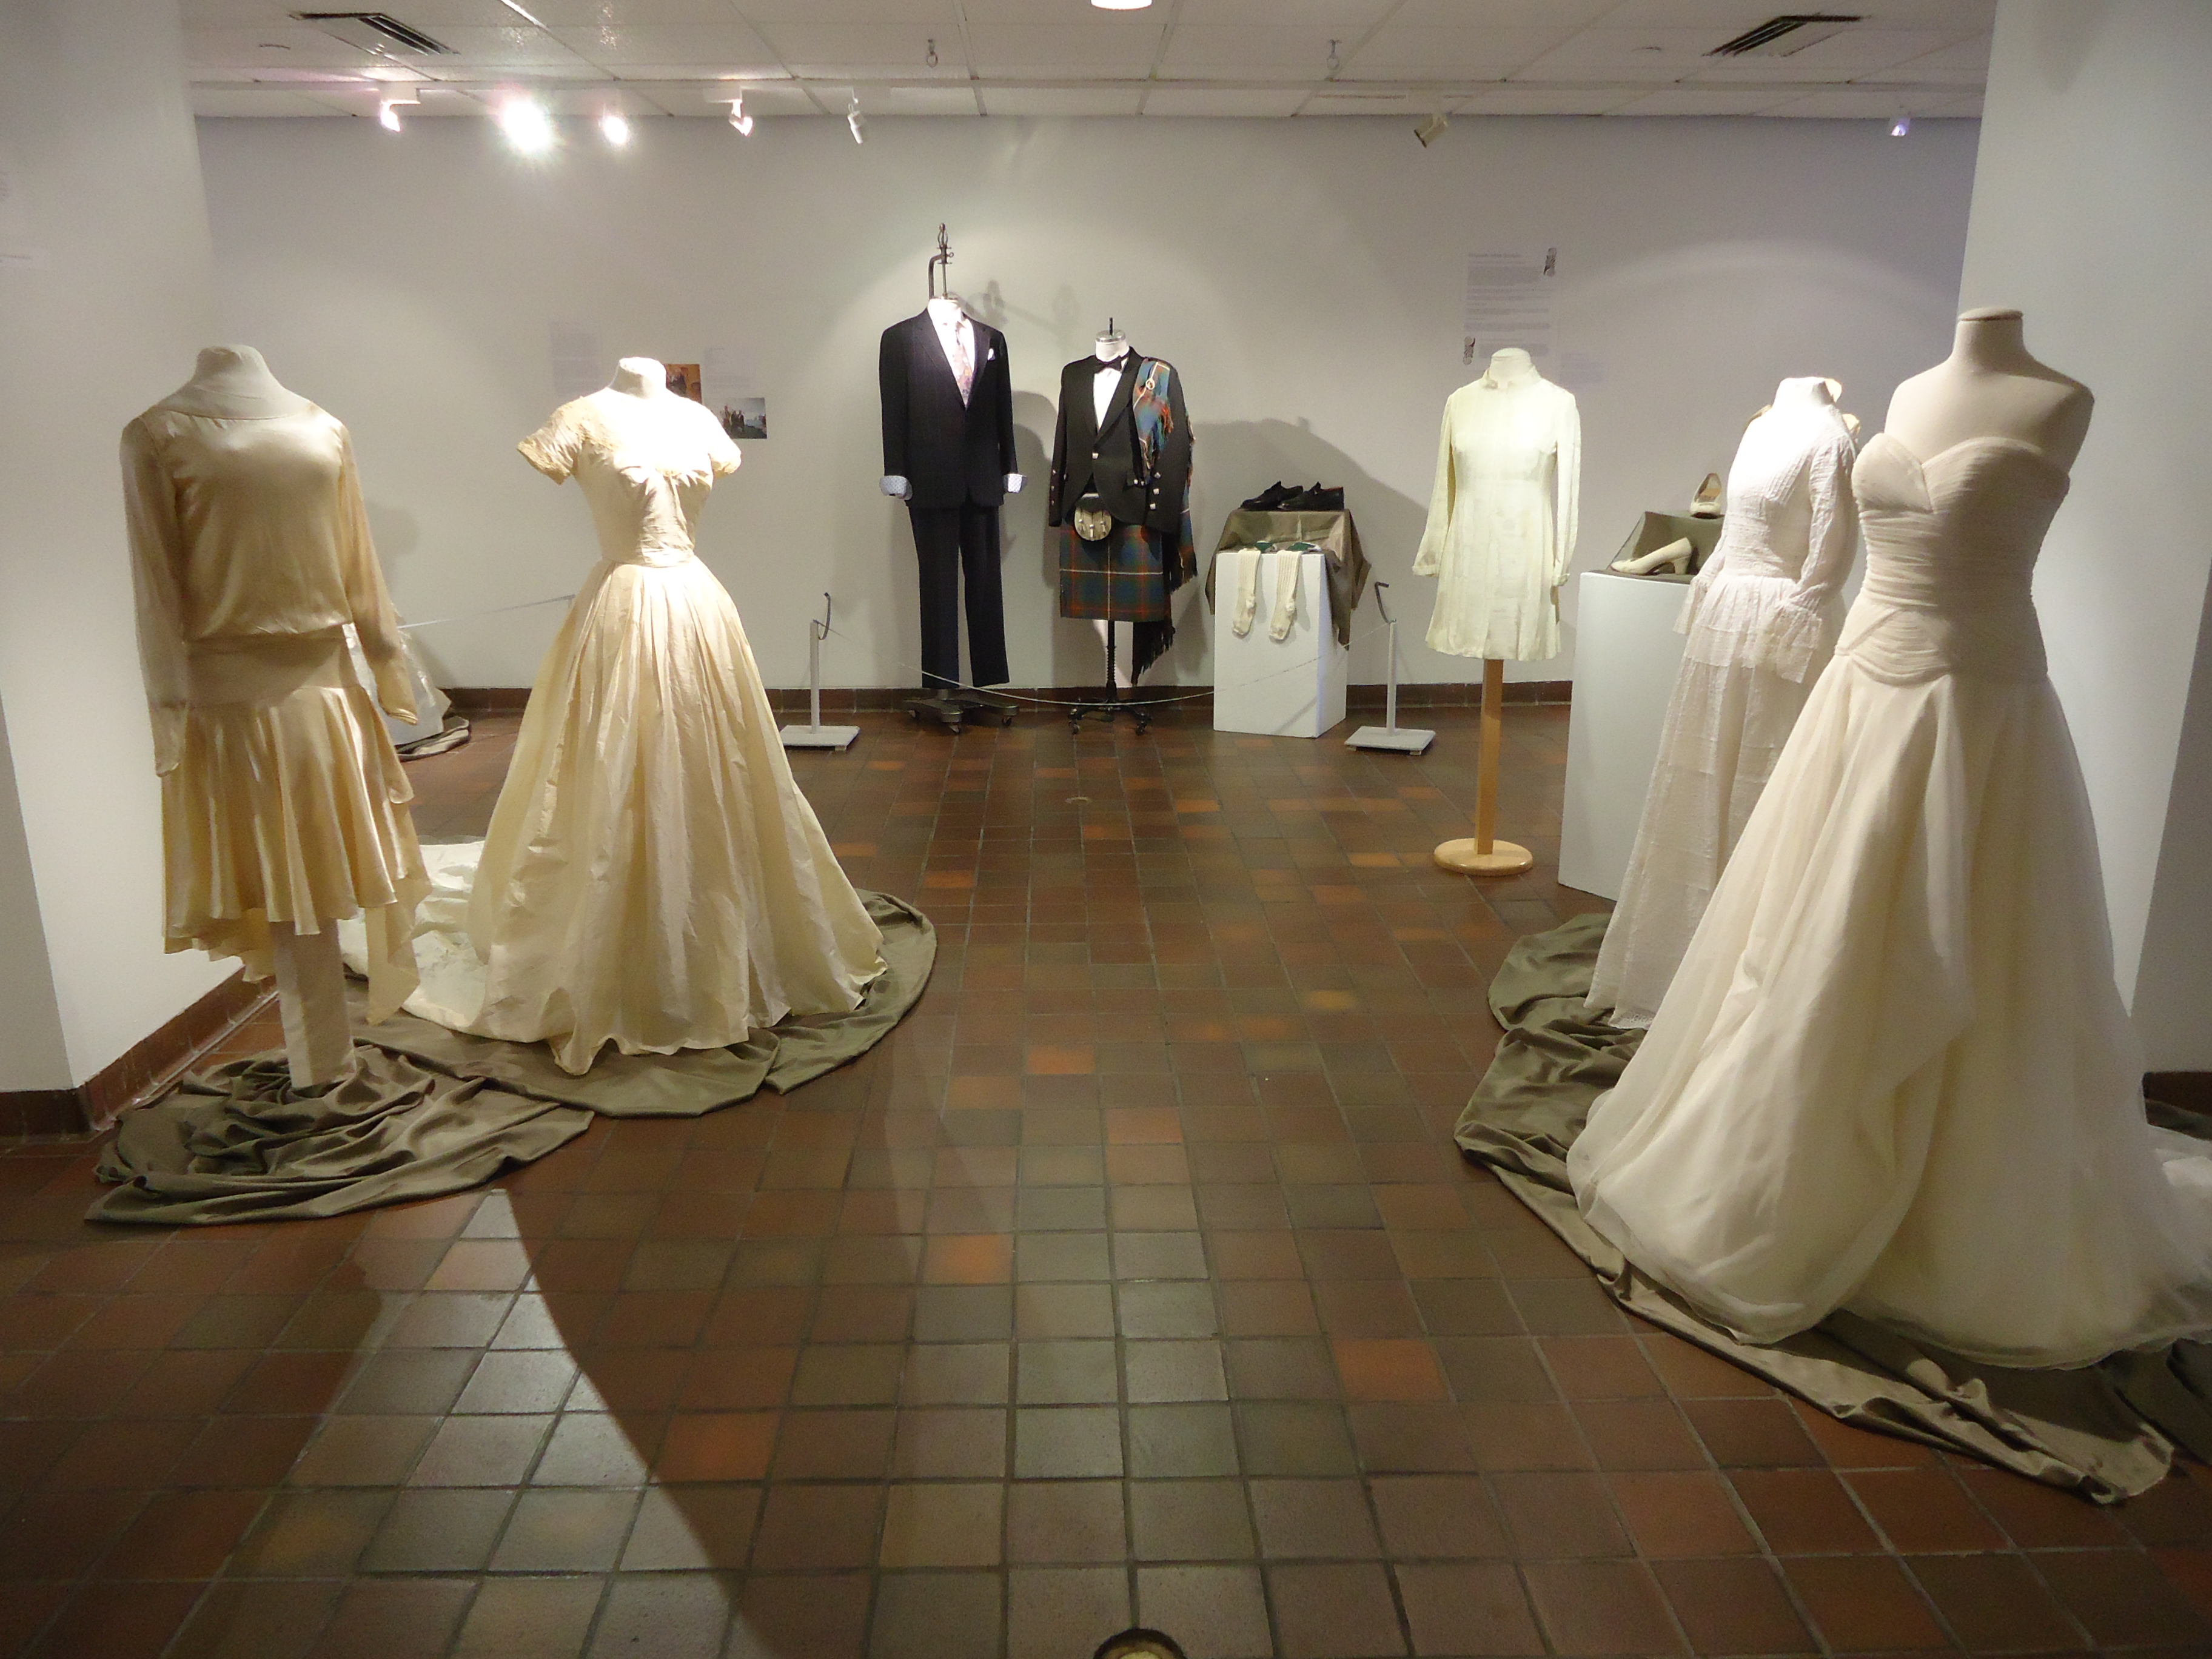 an image of 5 very different wedding dresses and 2 groom's outfits